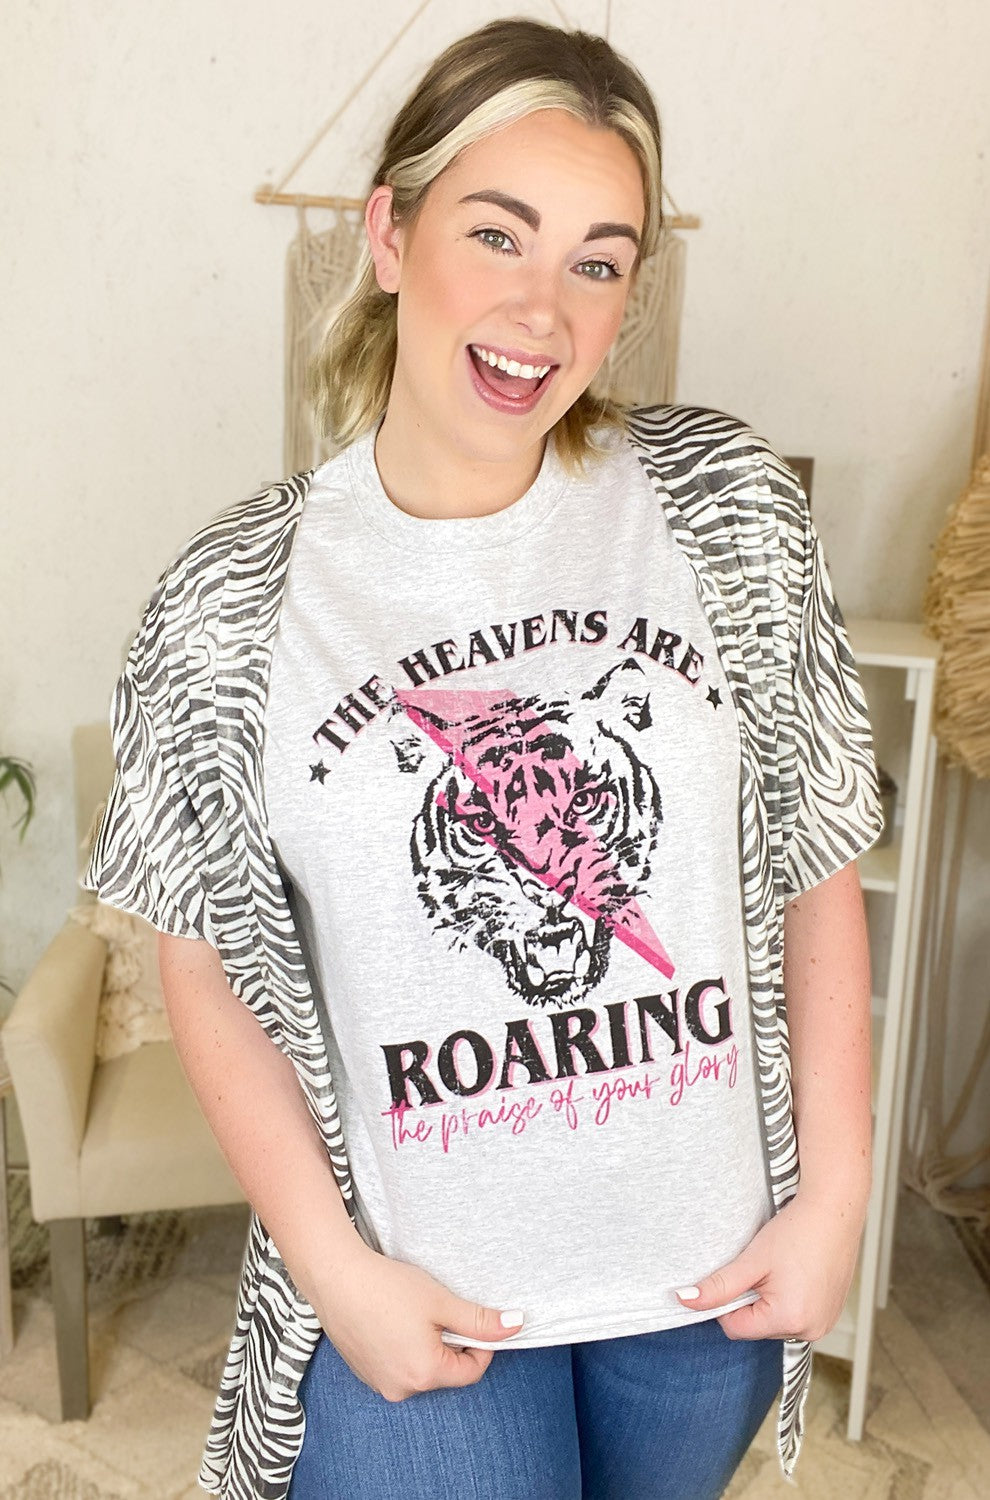 The Heavens are Roaring T-Shirt Top